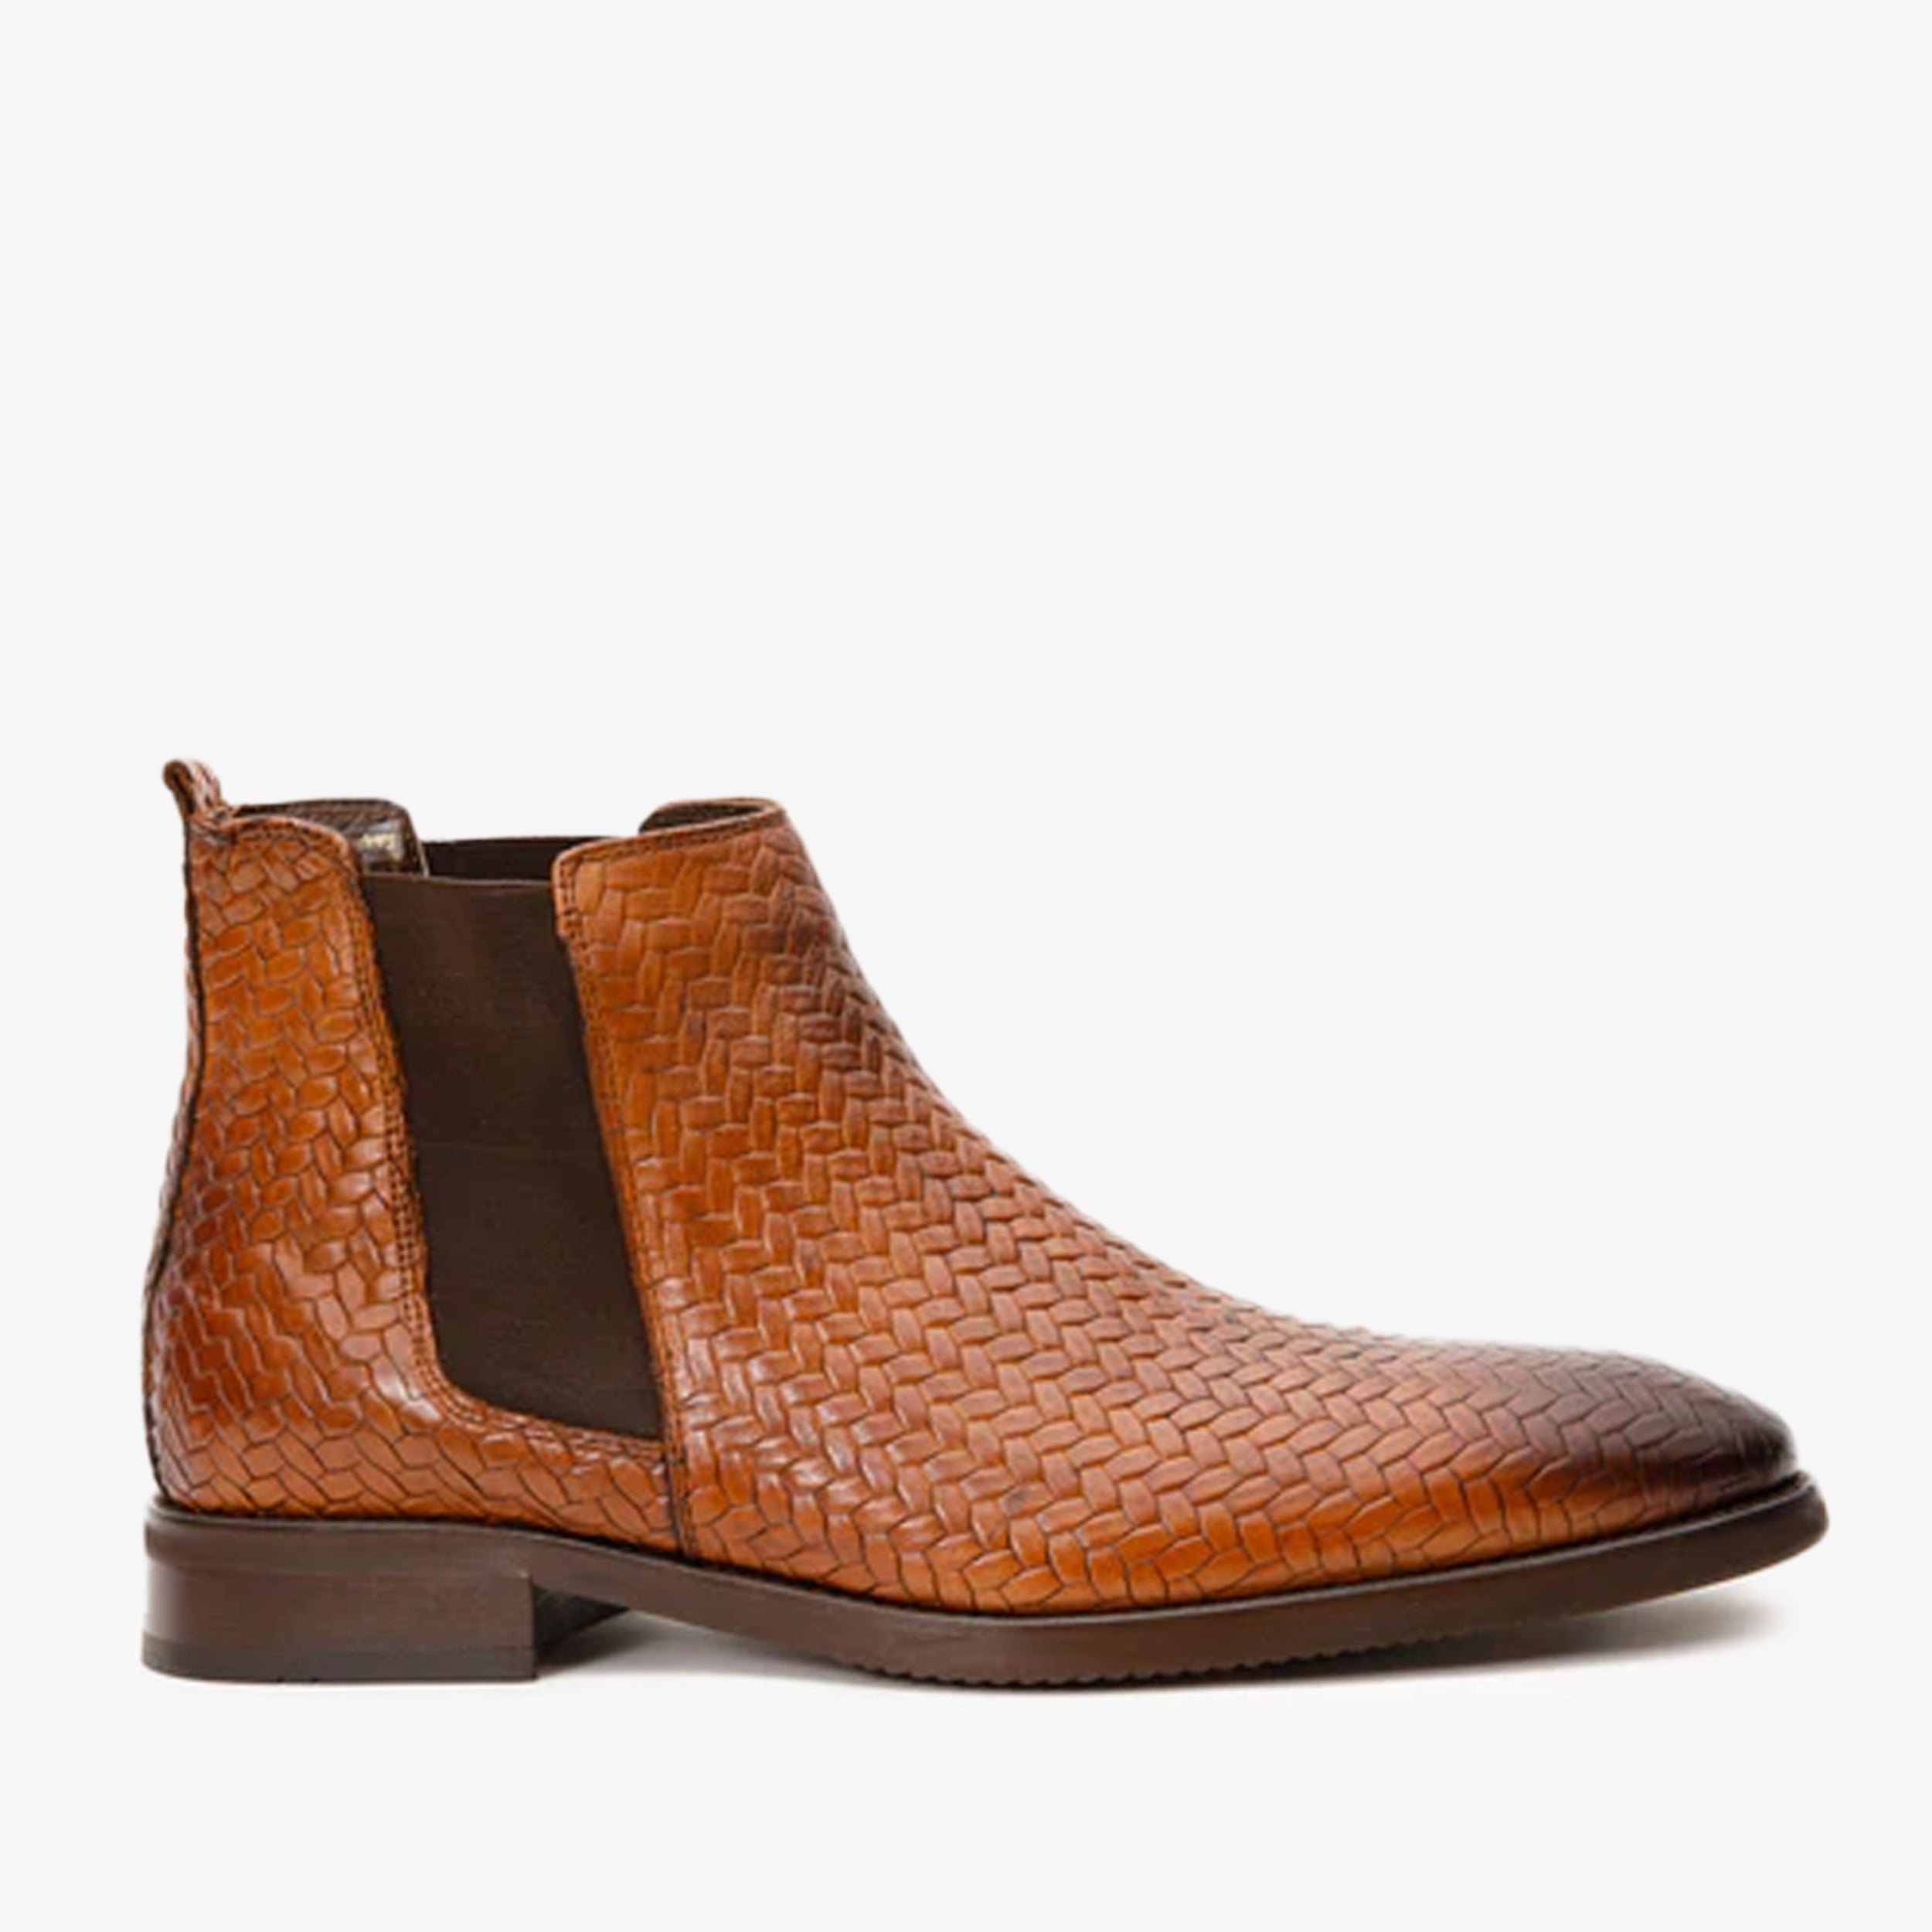 The Oslo Tan Leather Chelsea Men Boot